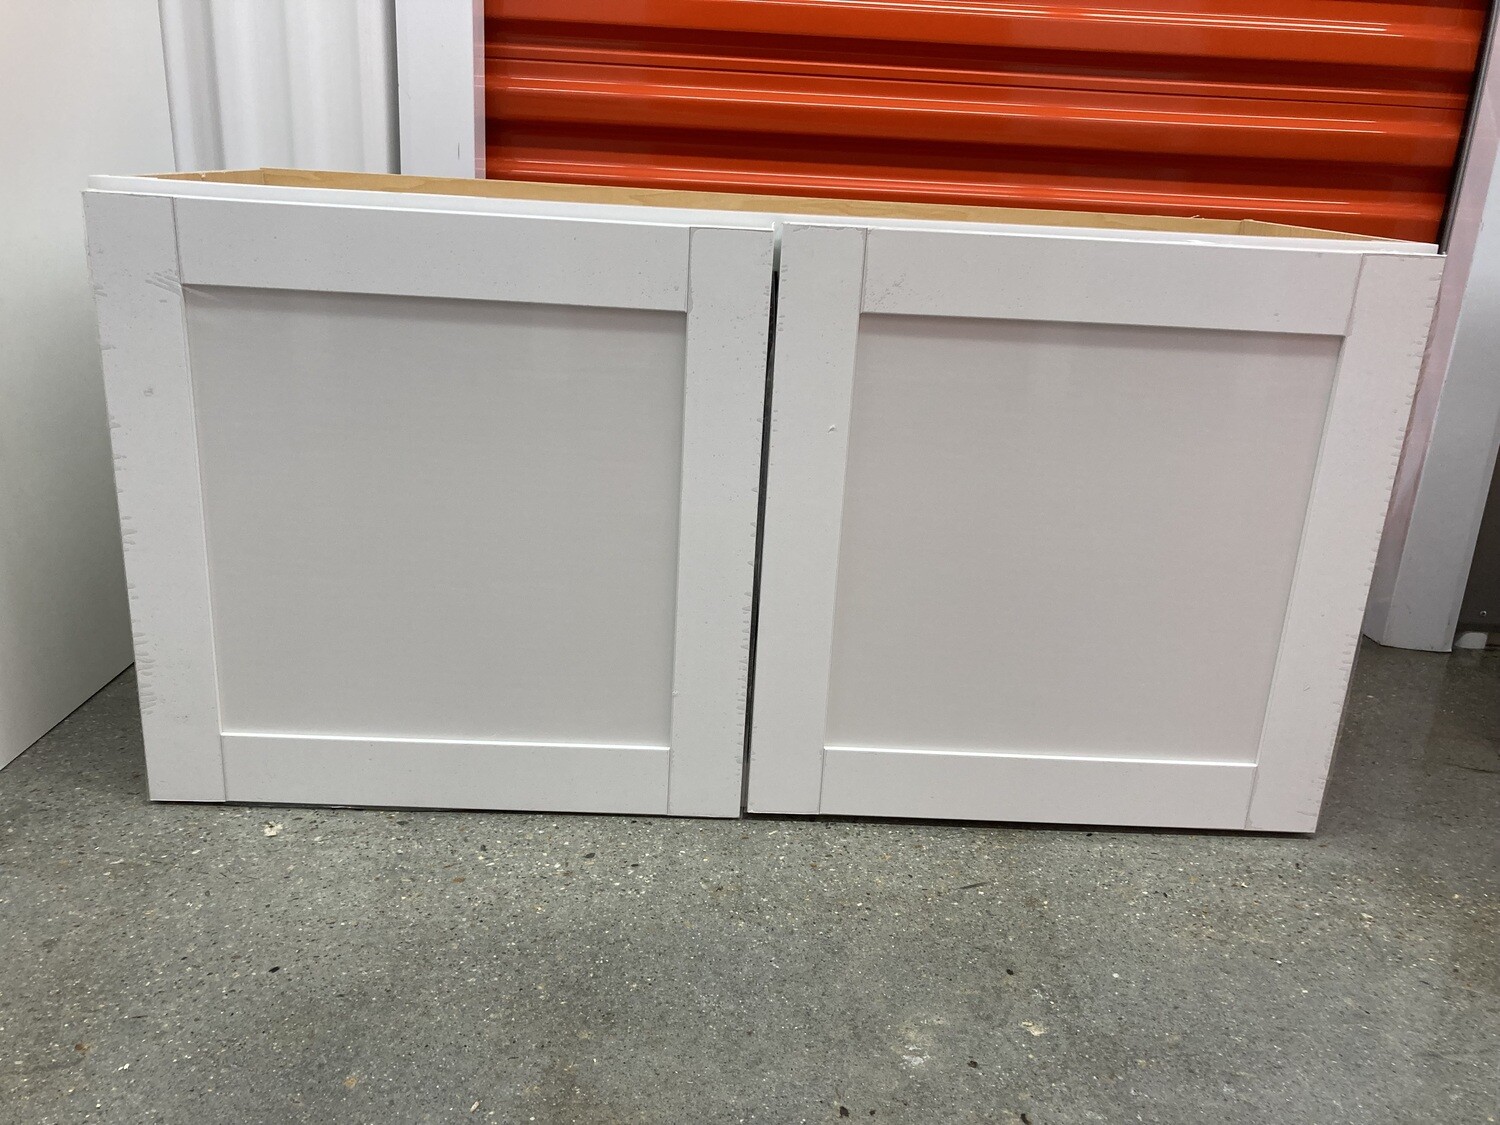 New Wall Cabinet, Arcadia white 35.5x18 #1266